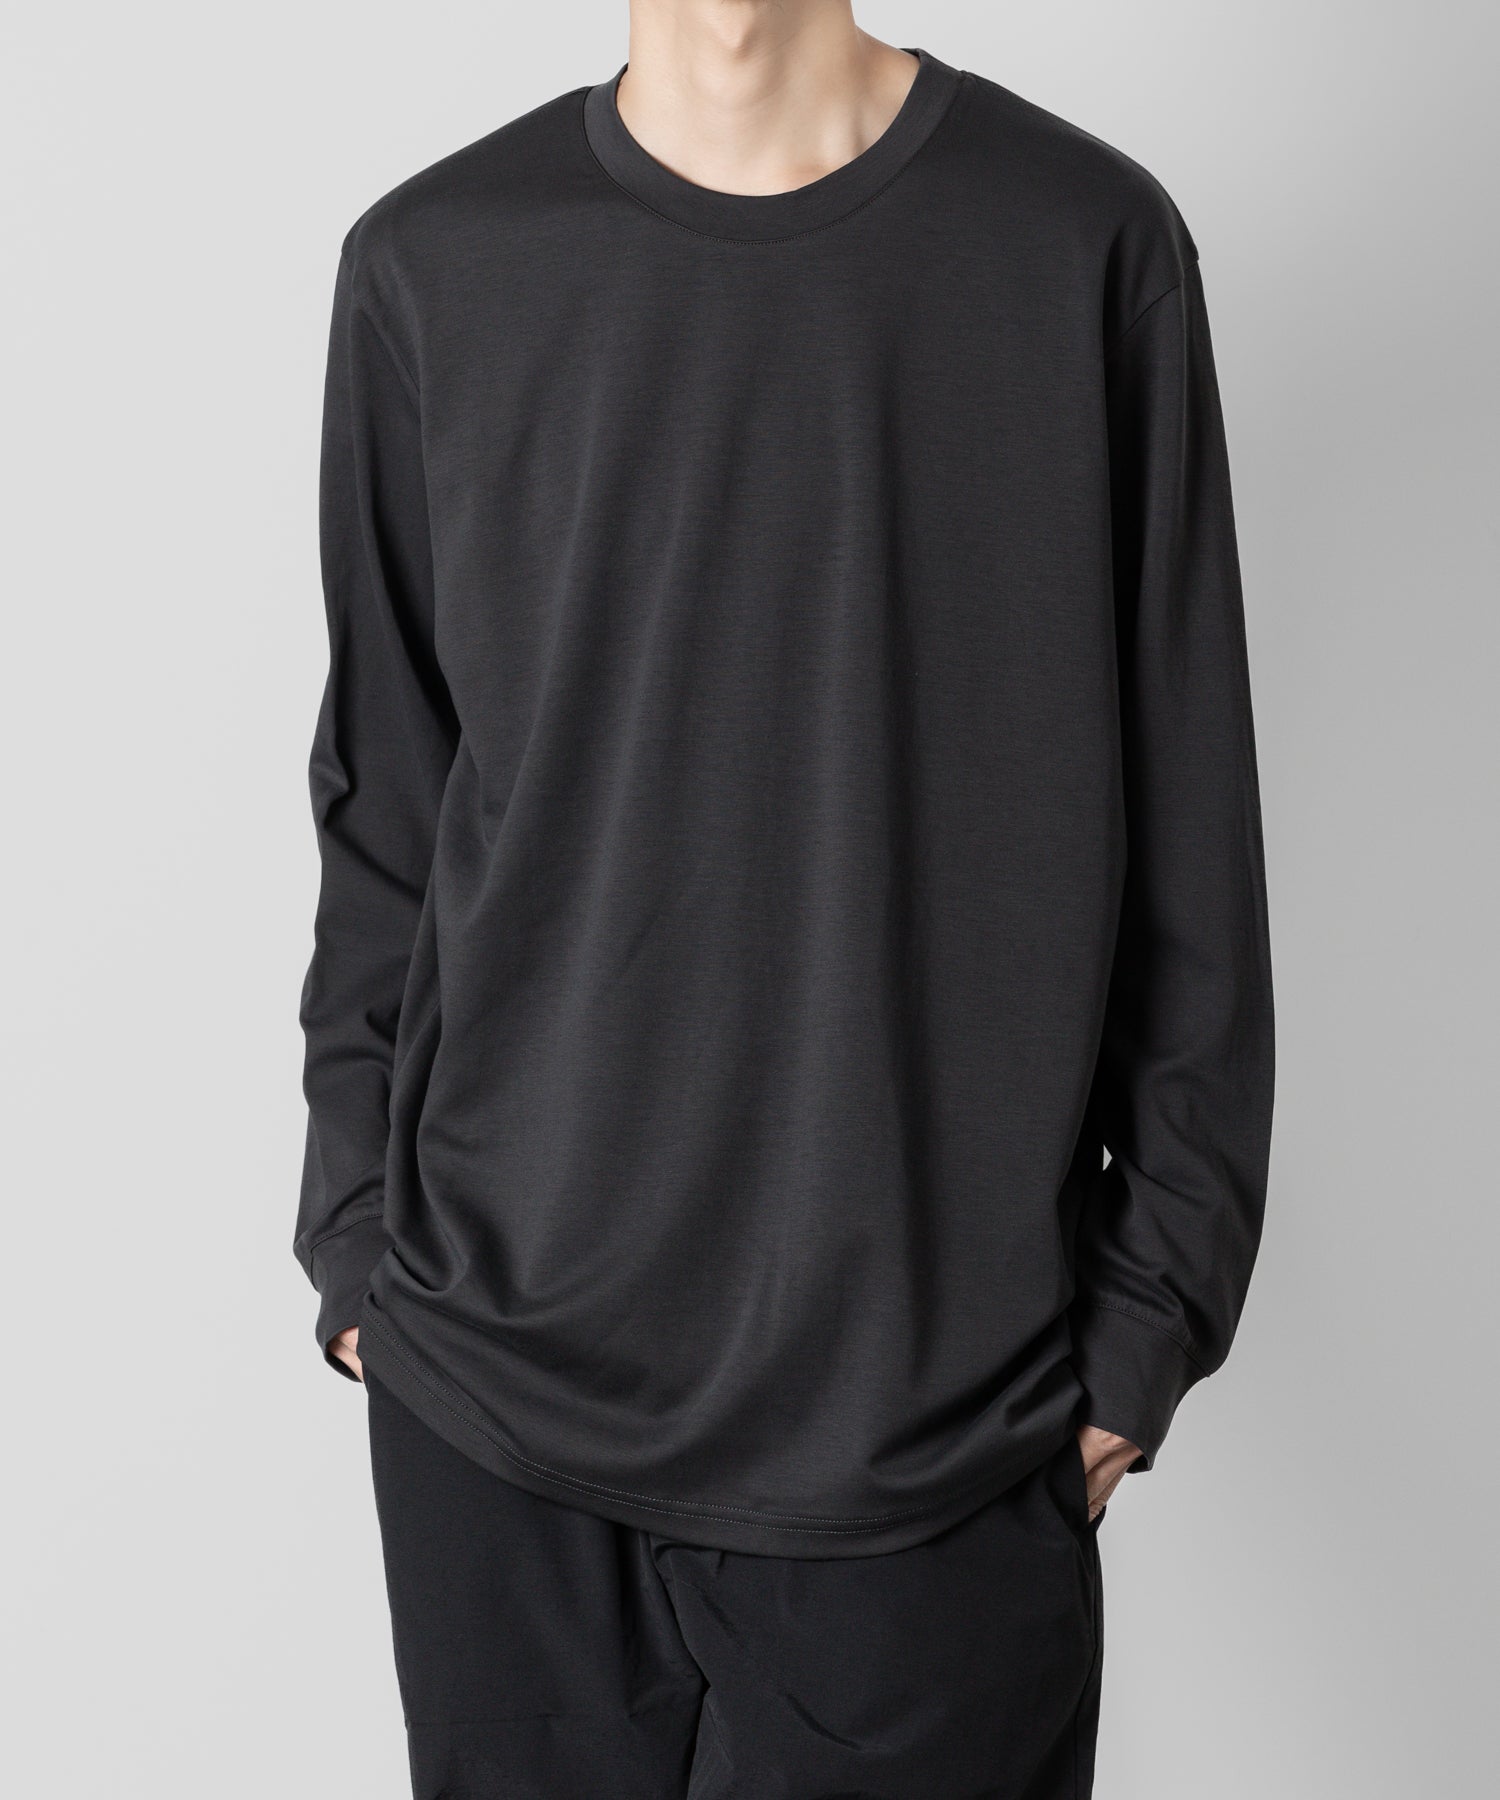 ATTACHMENT(アタッチメント)の23AWのCOTTON DOUBLE FACE OVERSIZED L/S TEEのD.GRAY